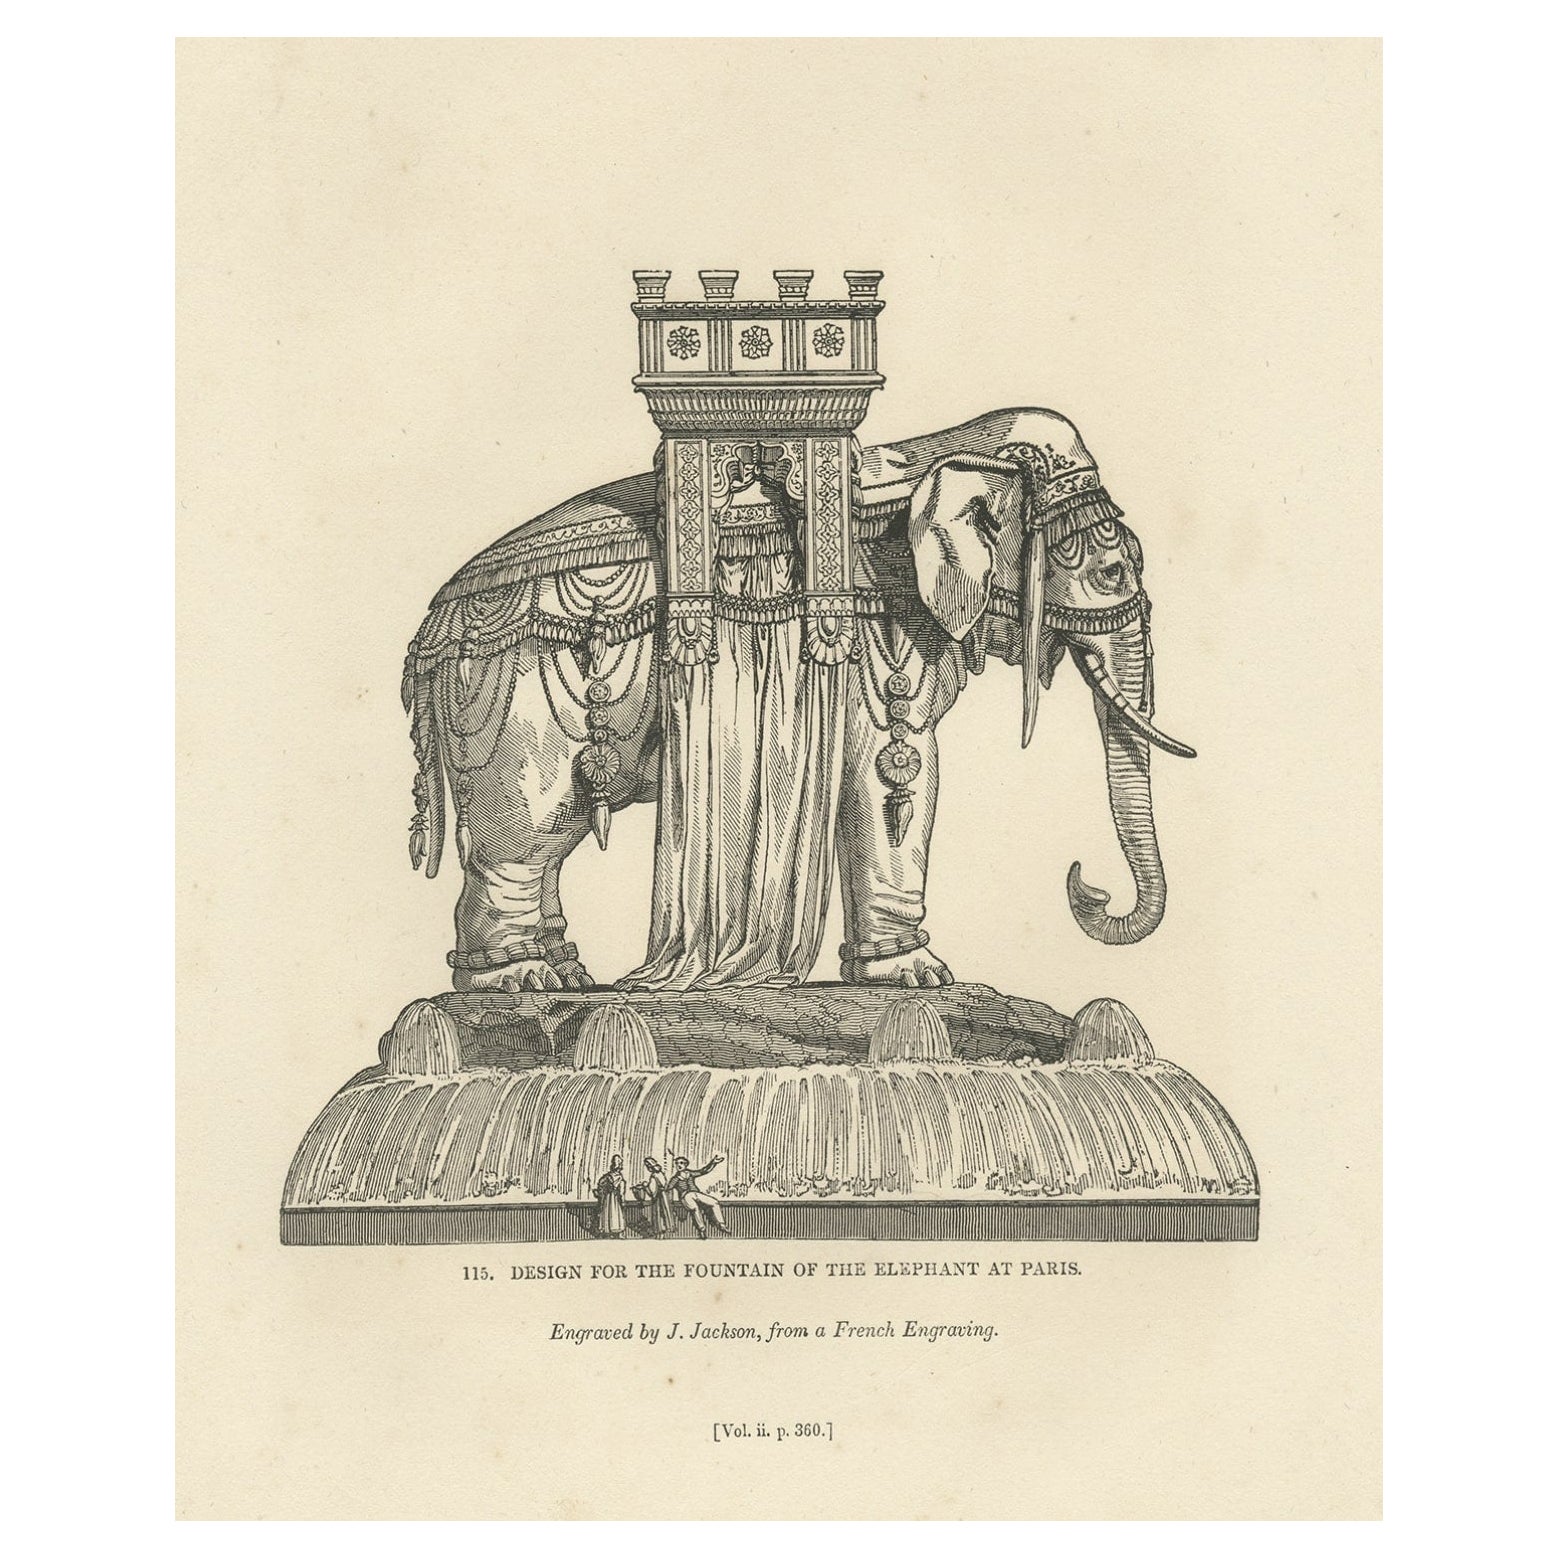 Original Antique Print of the Fountain of the Elephant in Paris, France, 1835